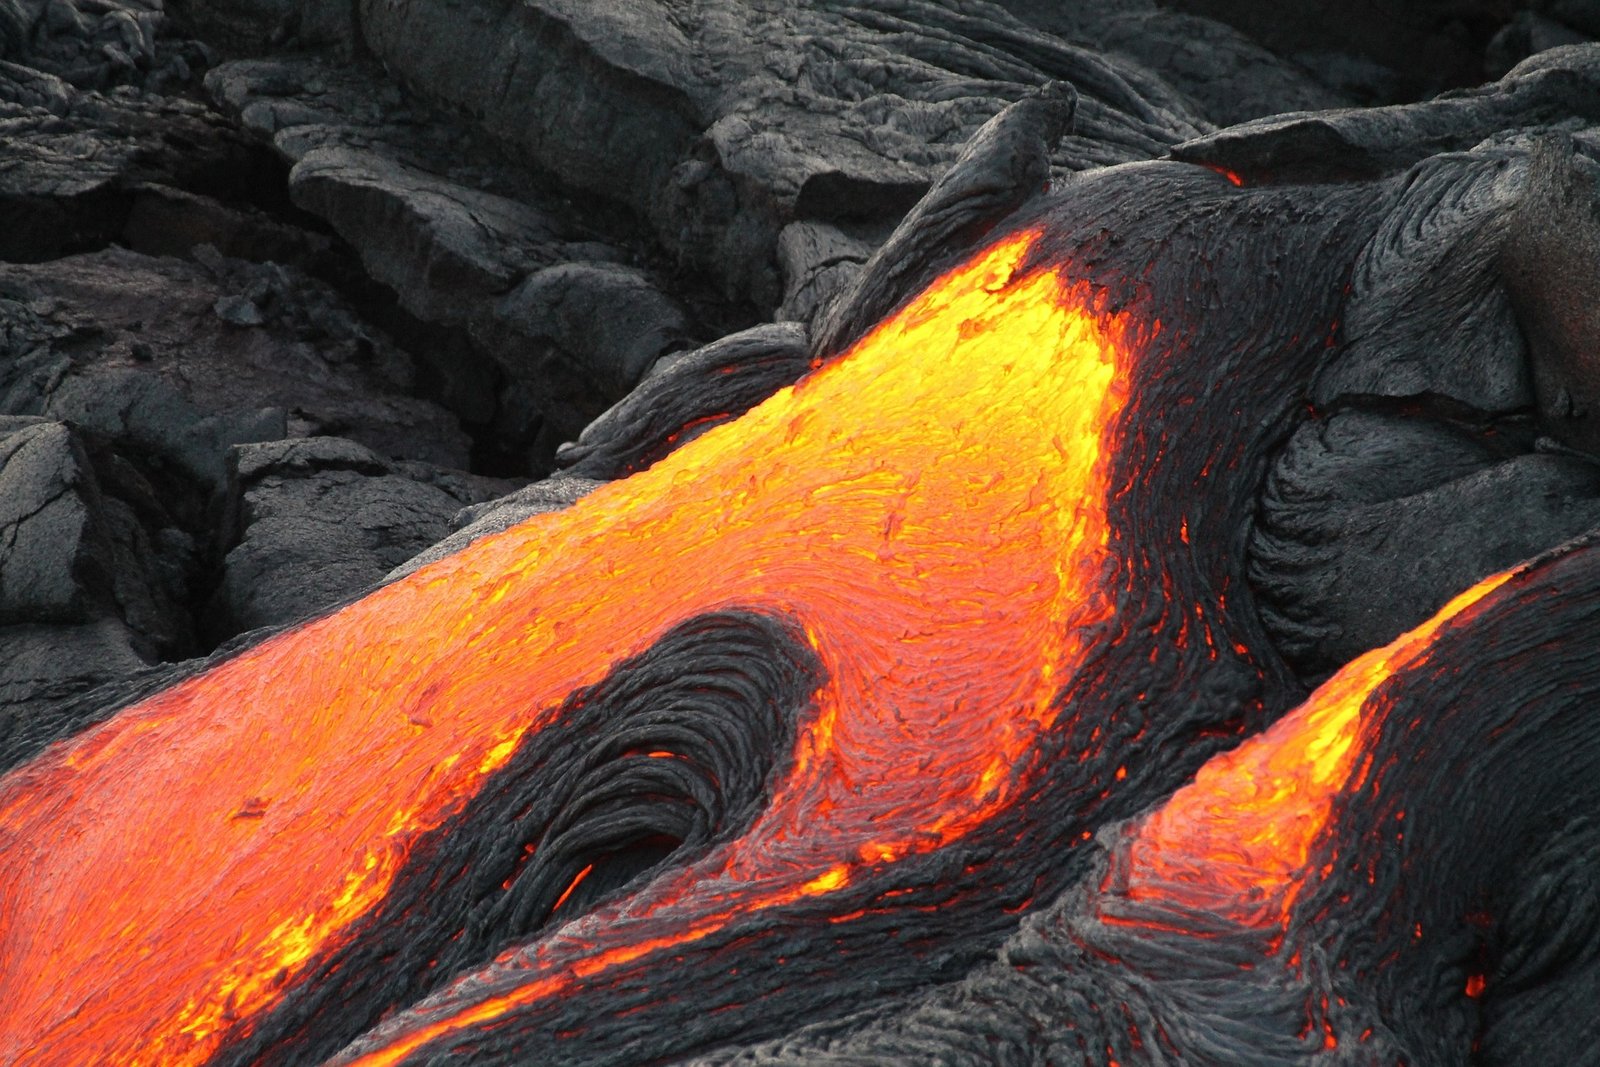 Volcano lava flowing - Image from Pixabay